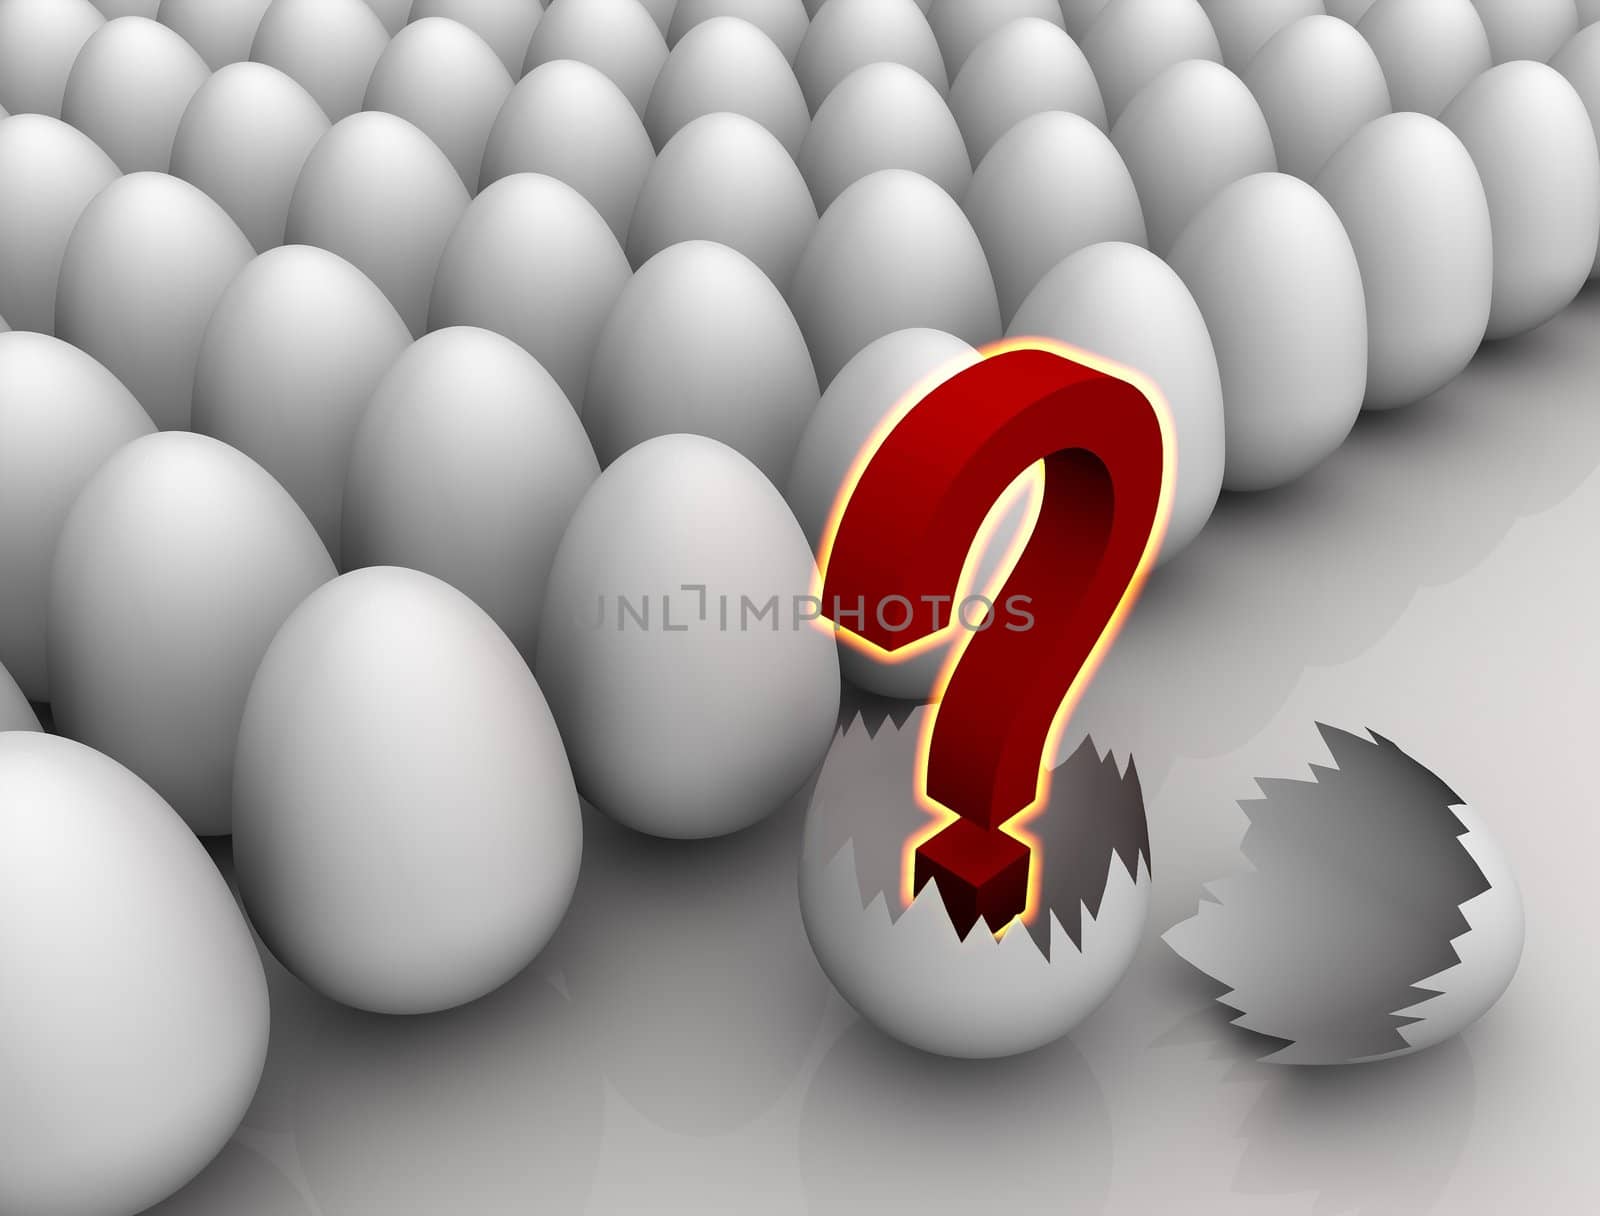 Concept of crowd of white not yet cracked eggs with the only one egg already cracked. Red glowing question mark above the cracked egg symbolizes something unknown, hidden or some secret. Scene rendered on white background.